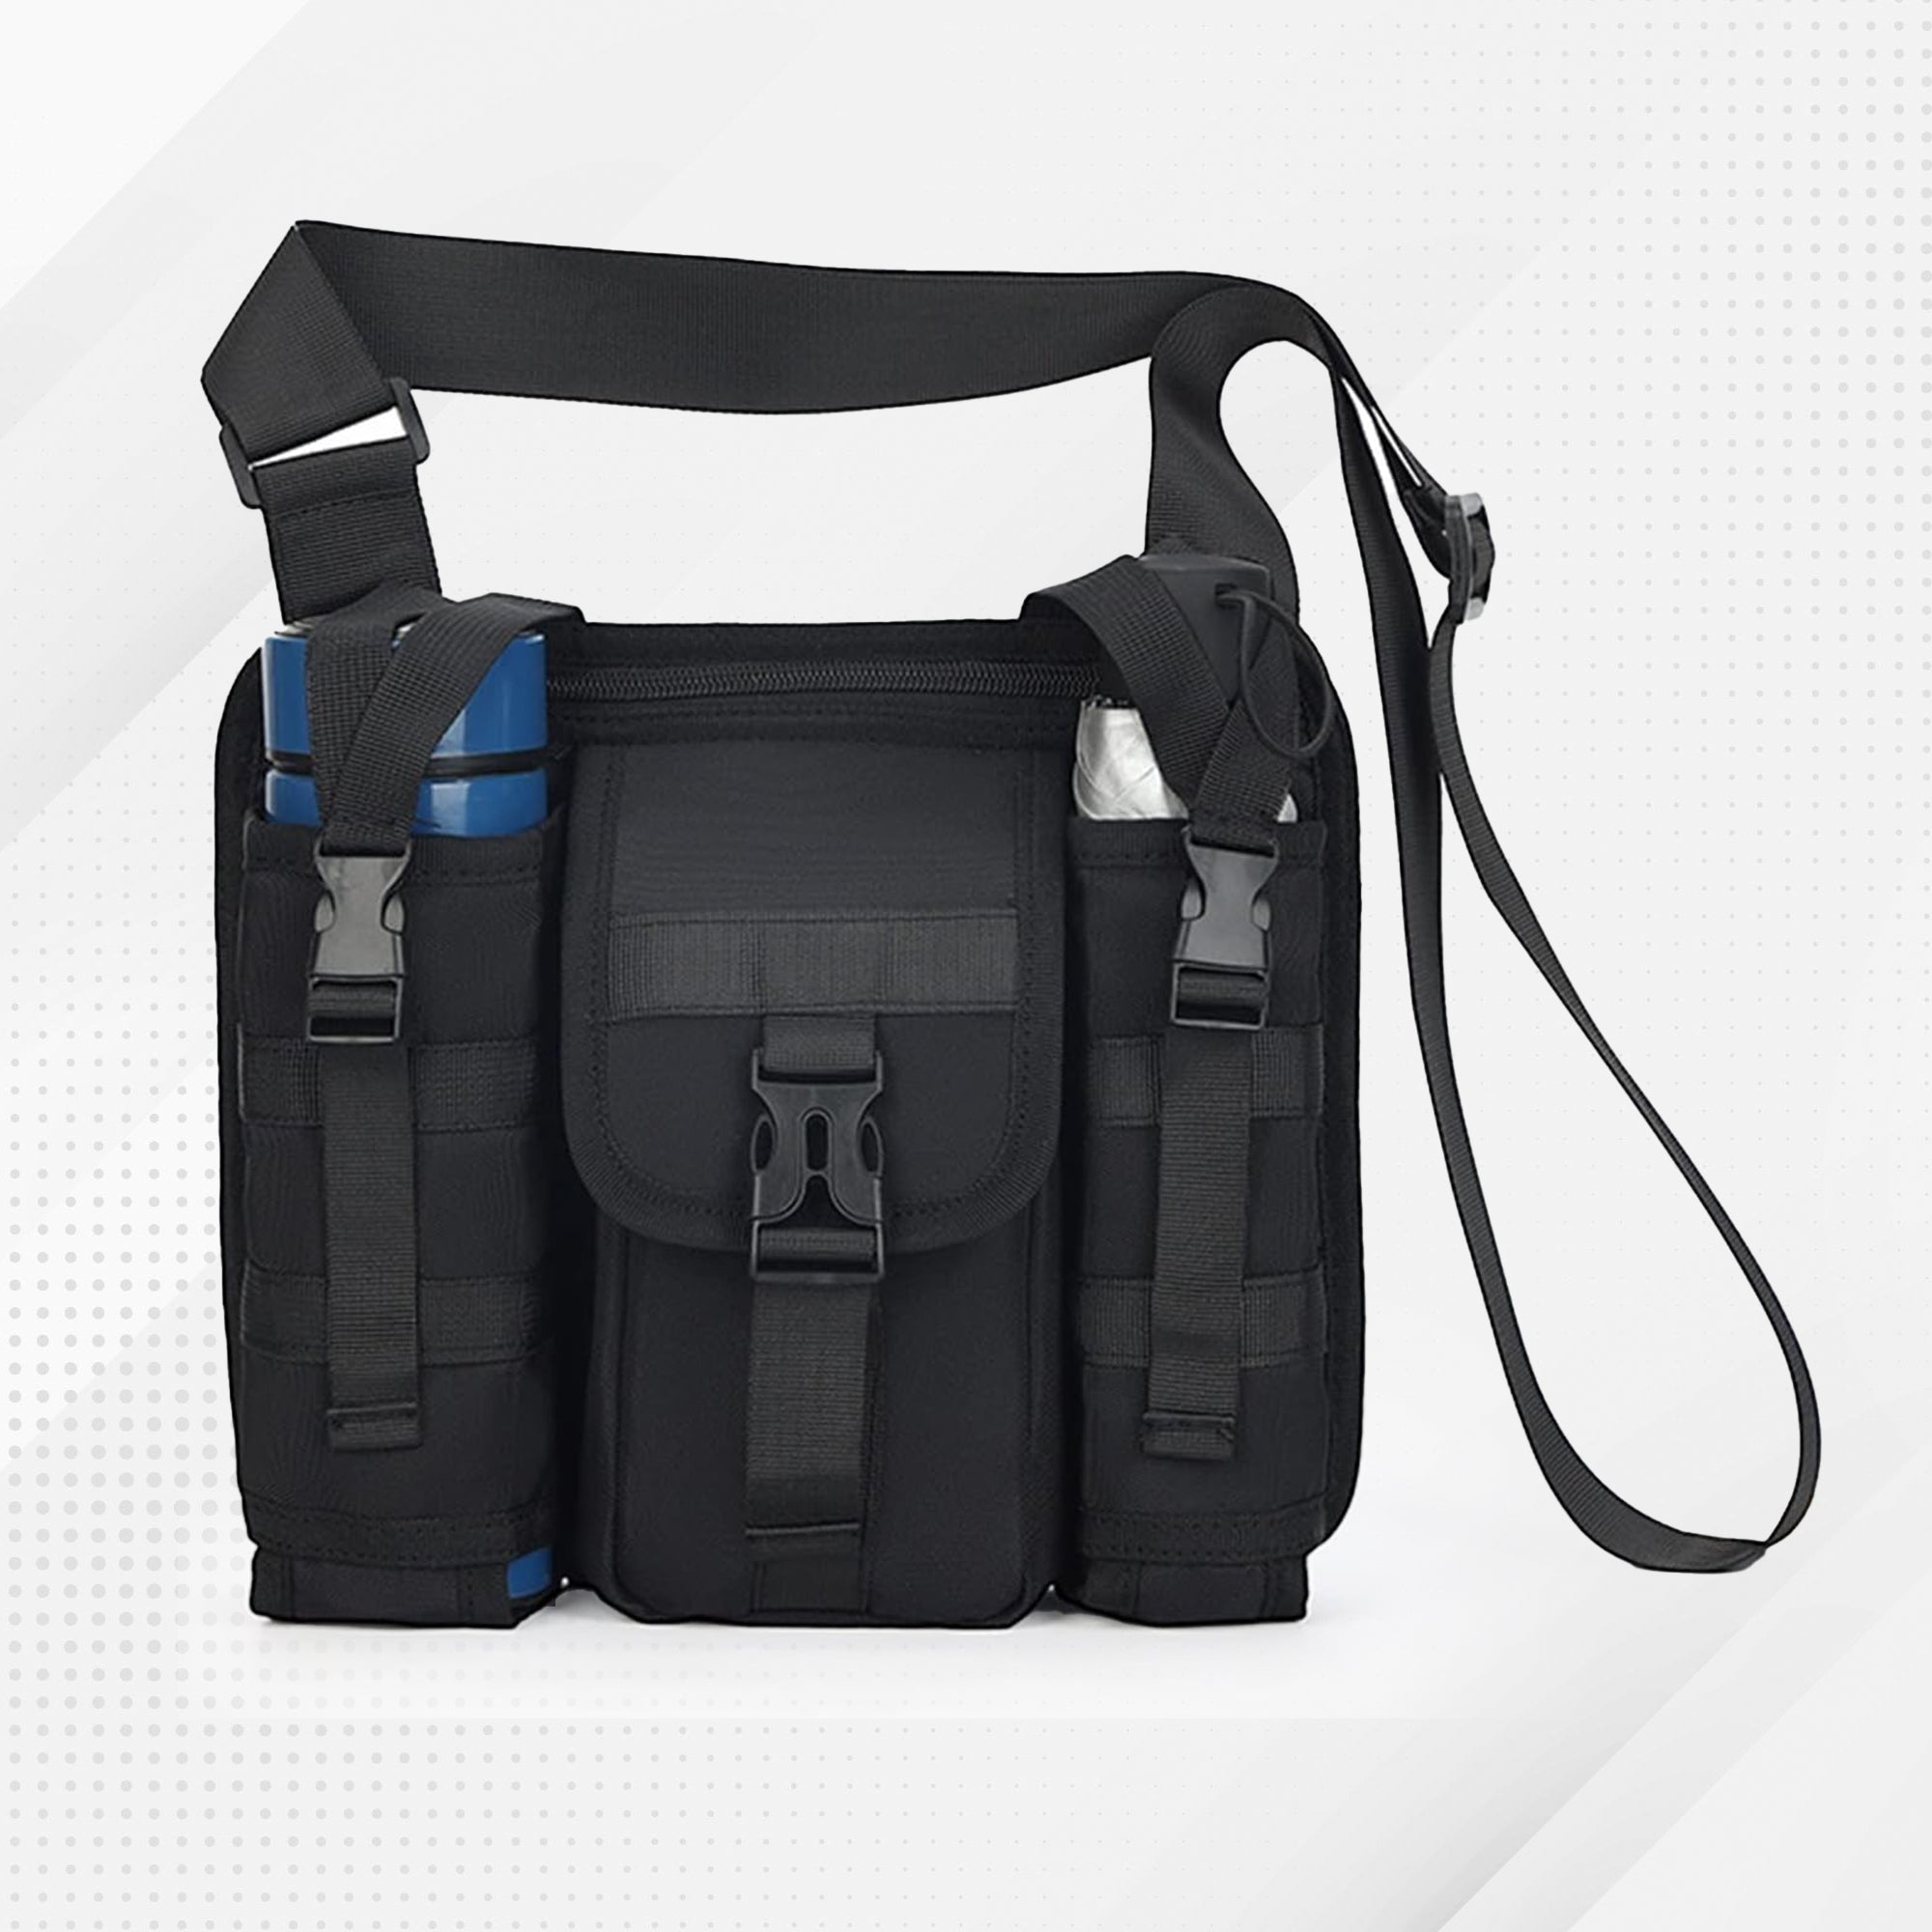 Adventure Ease Carry Bag